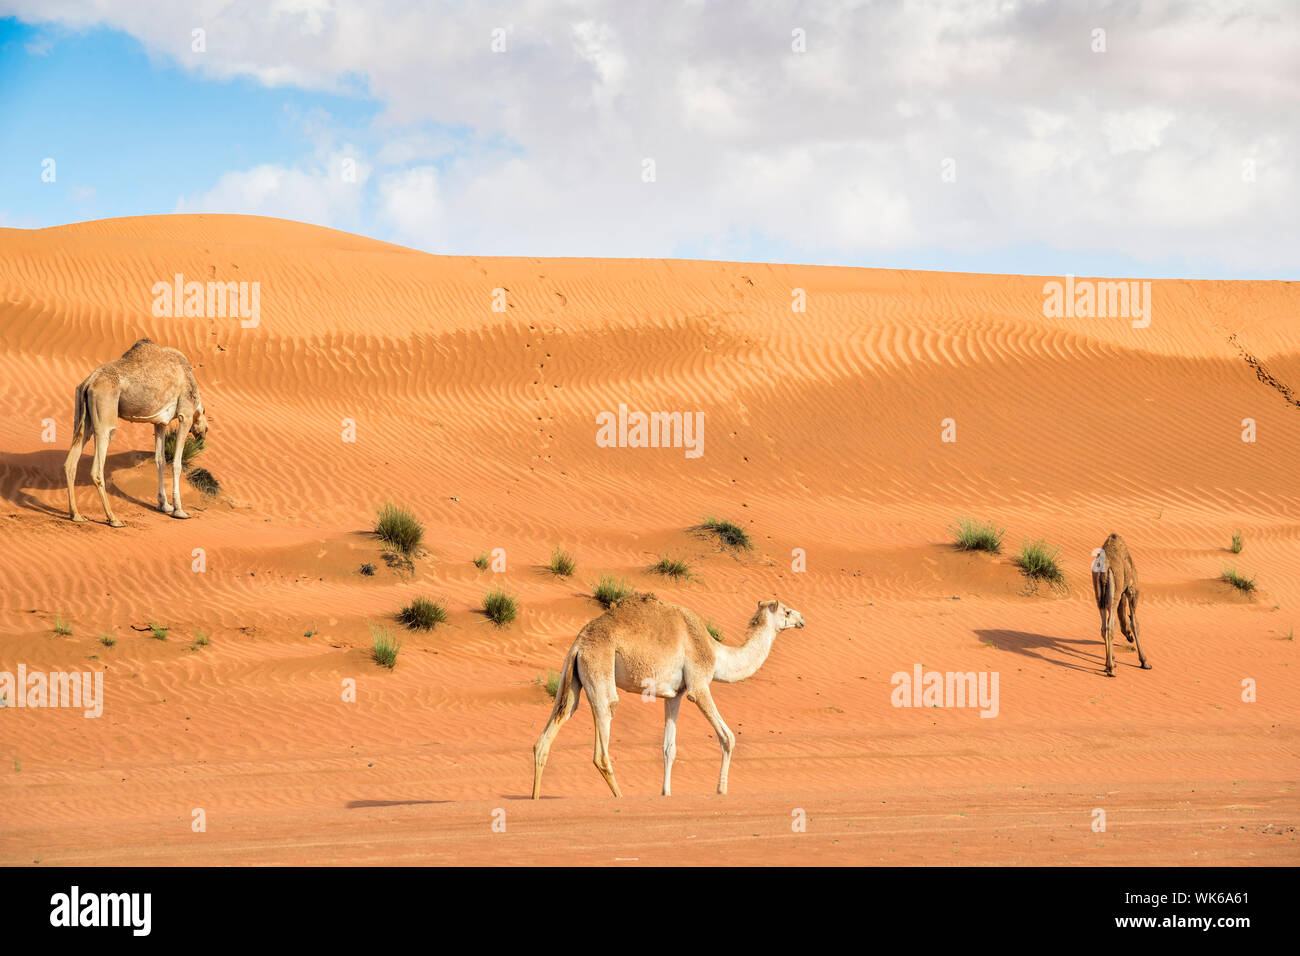 Image of three camels in desert Wahiba Oman Stock Photo